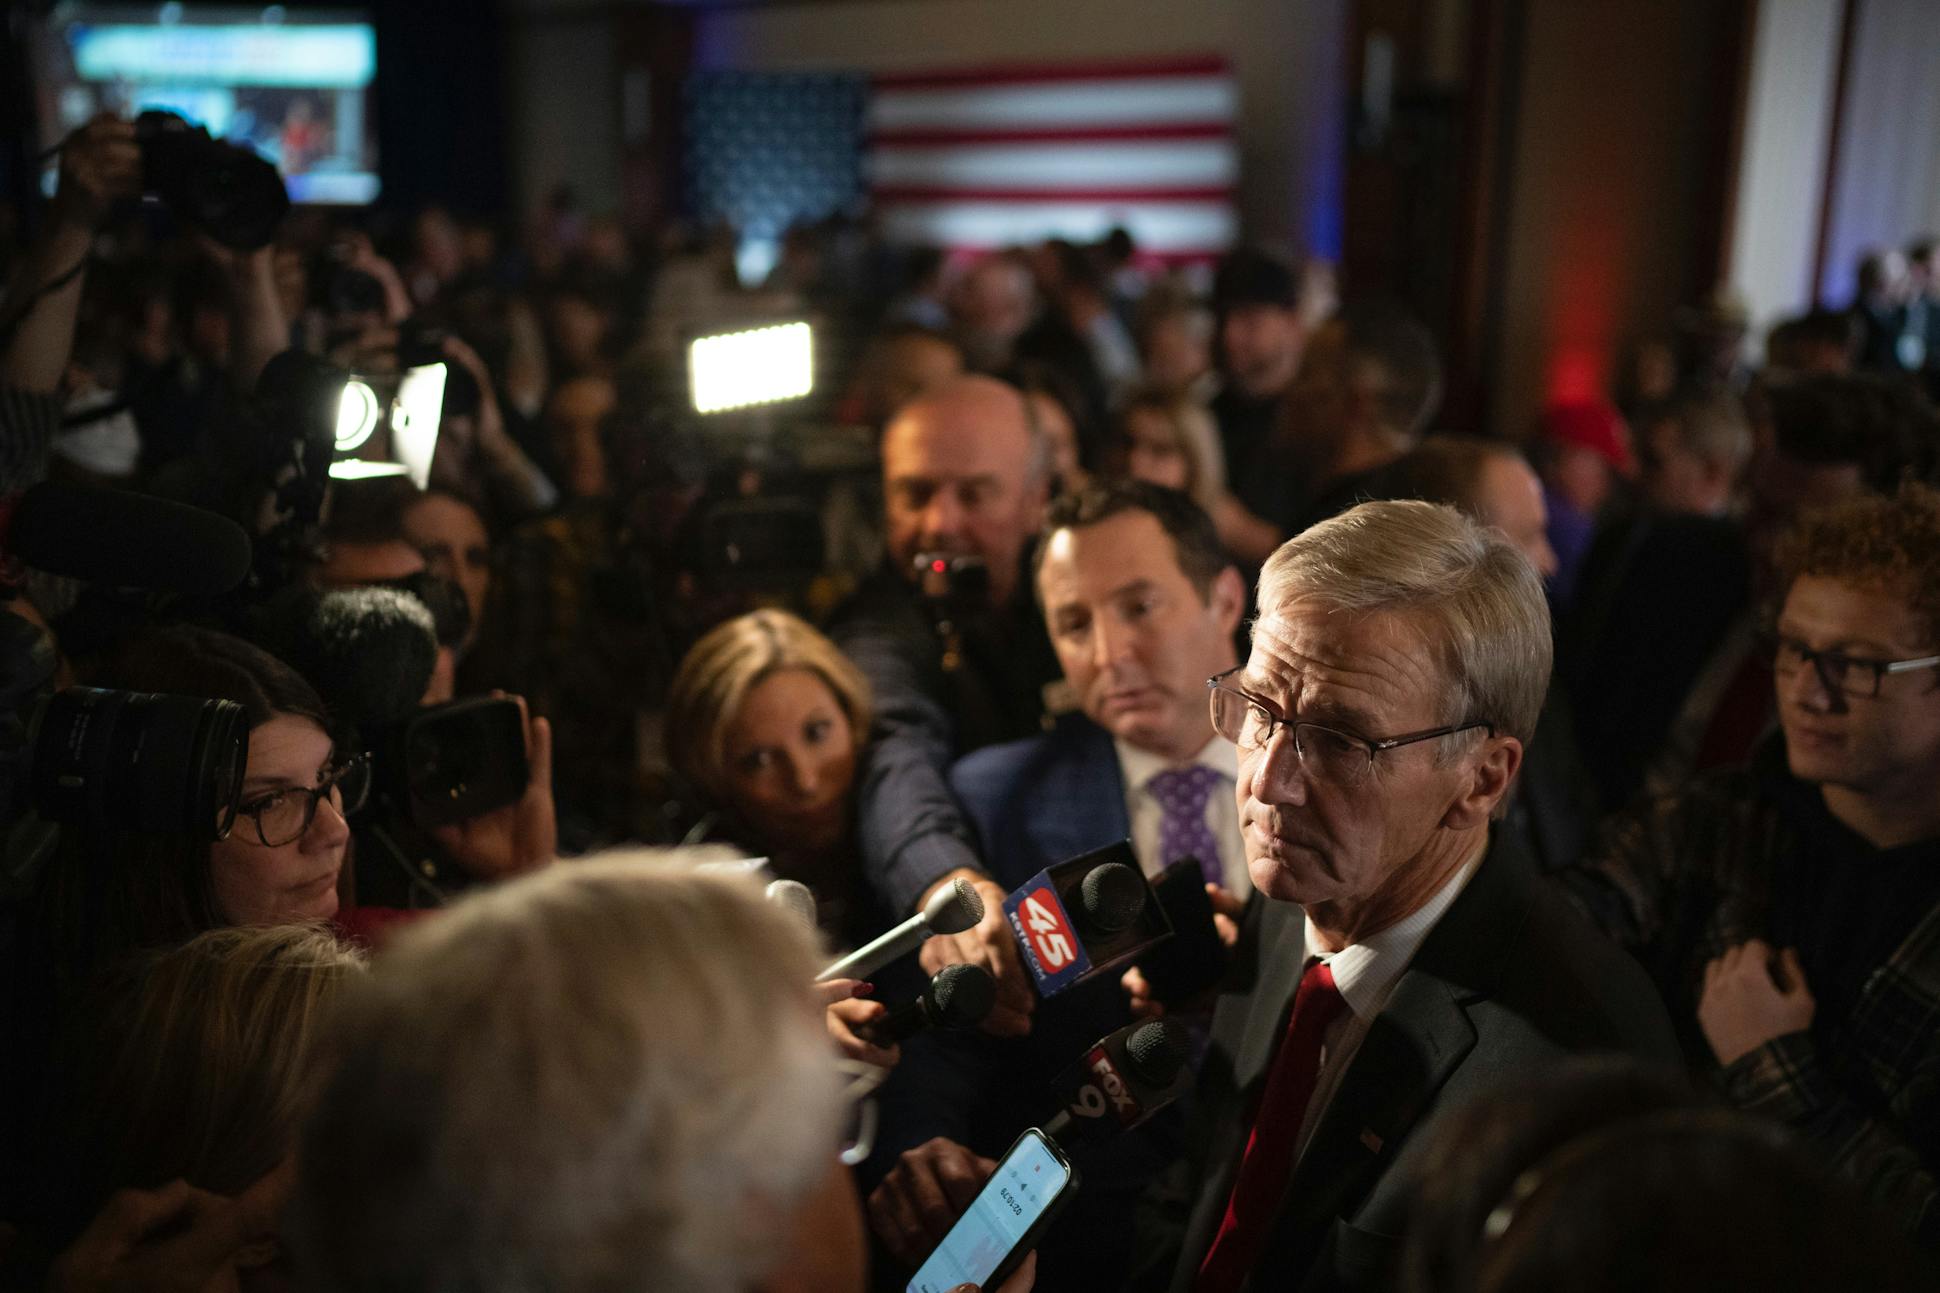 Former Republican gubernatorial candidate Scott Jensen, seen here at the GOP election night party on Nov. 8, 2022, said he felt pressured by party activists to take hardline stances on issues such as abortion during his campaign.